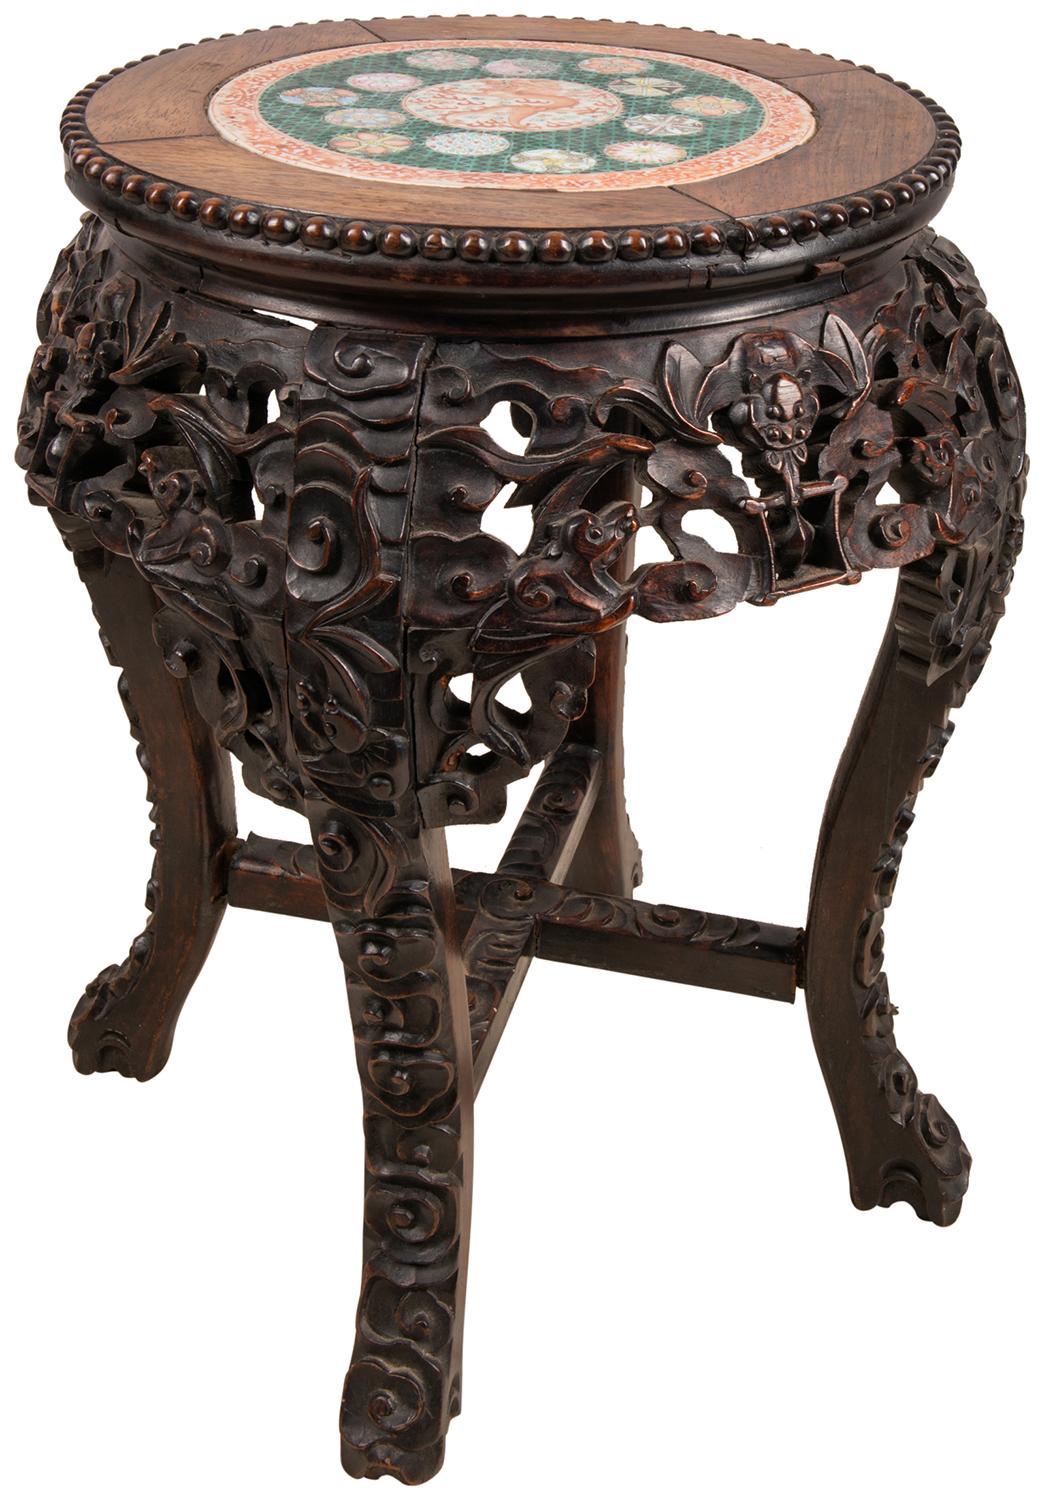 An unusual 19th century Chinese hardwood stand with hand carved foliate decoration, a Famille Verte porcelain plate inset to the center, depicting a mythical dragon, with a green ground boarder and classical motif symbols around.